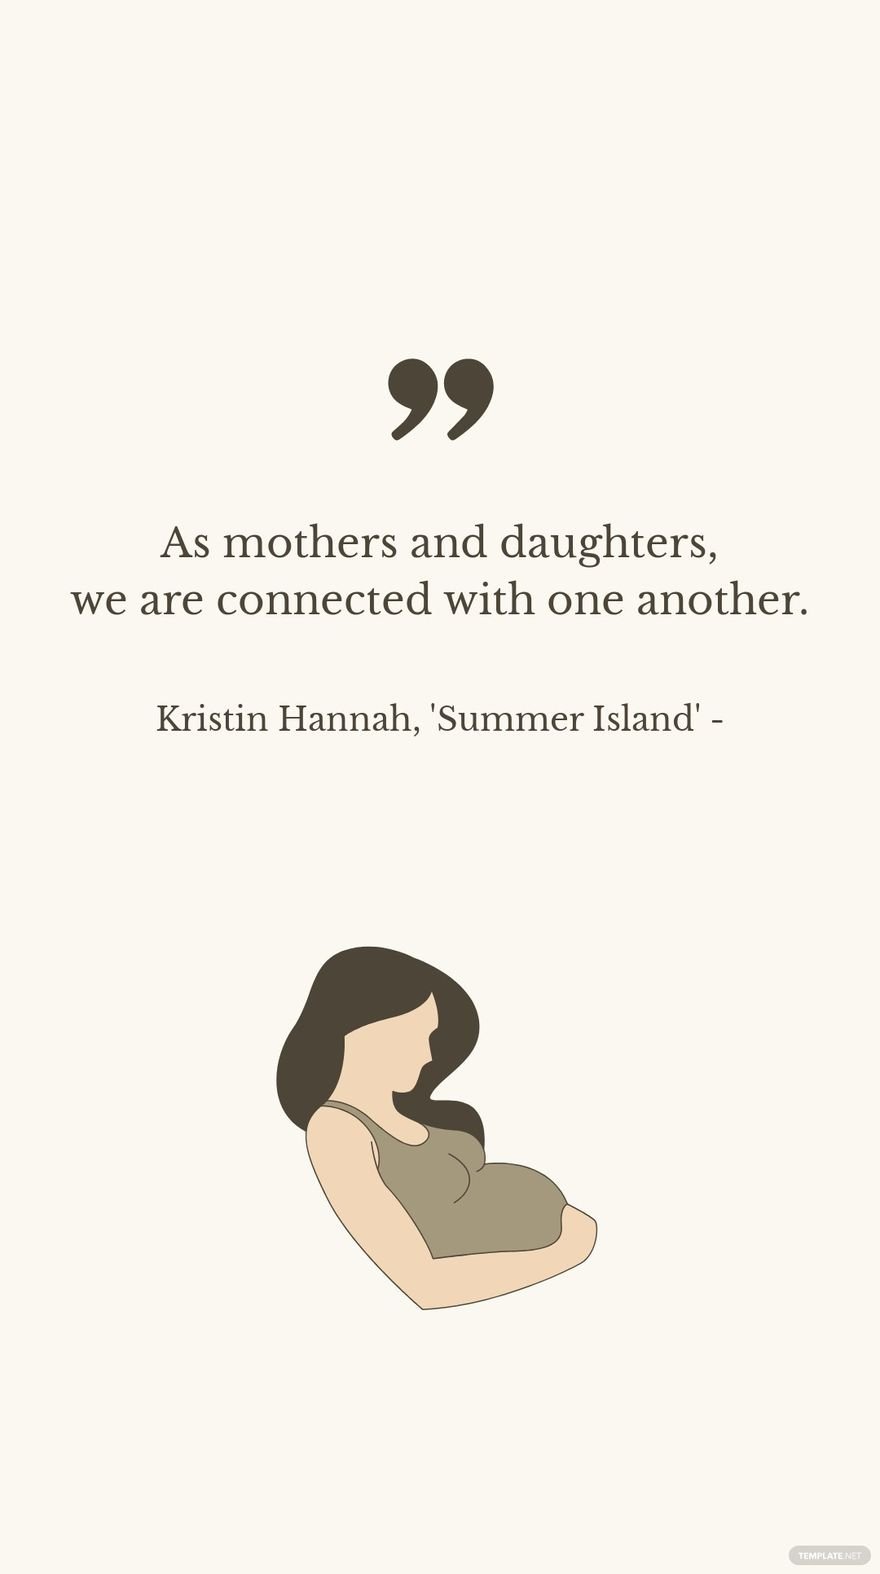 Kristin Hannah, 'Summer Island' - As mothers and daughters, we are connected with one another.